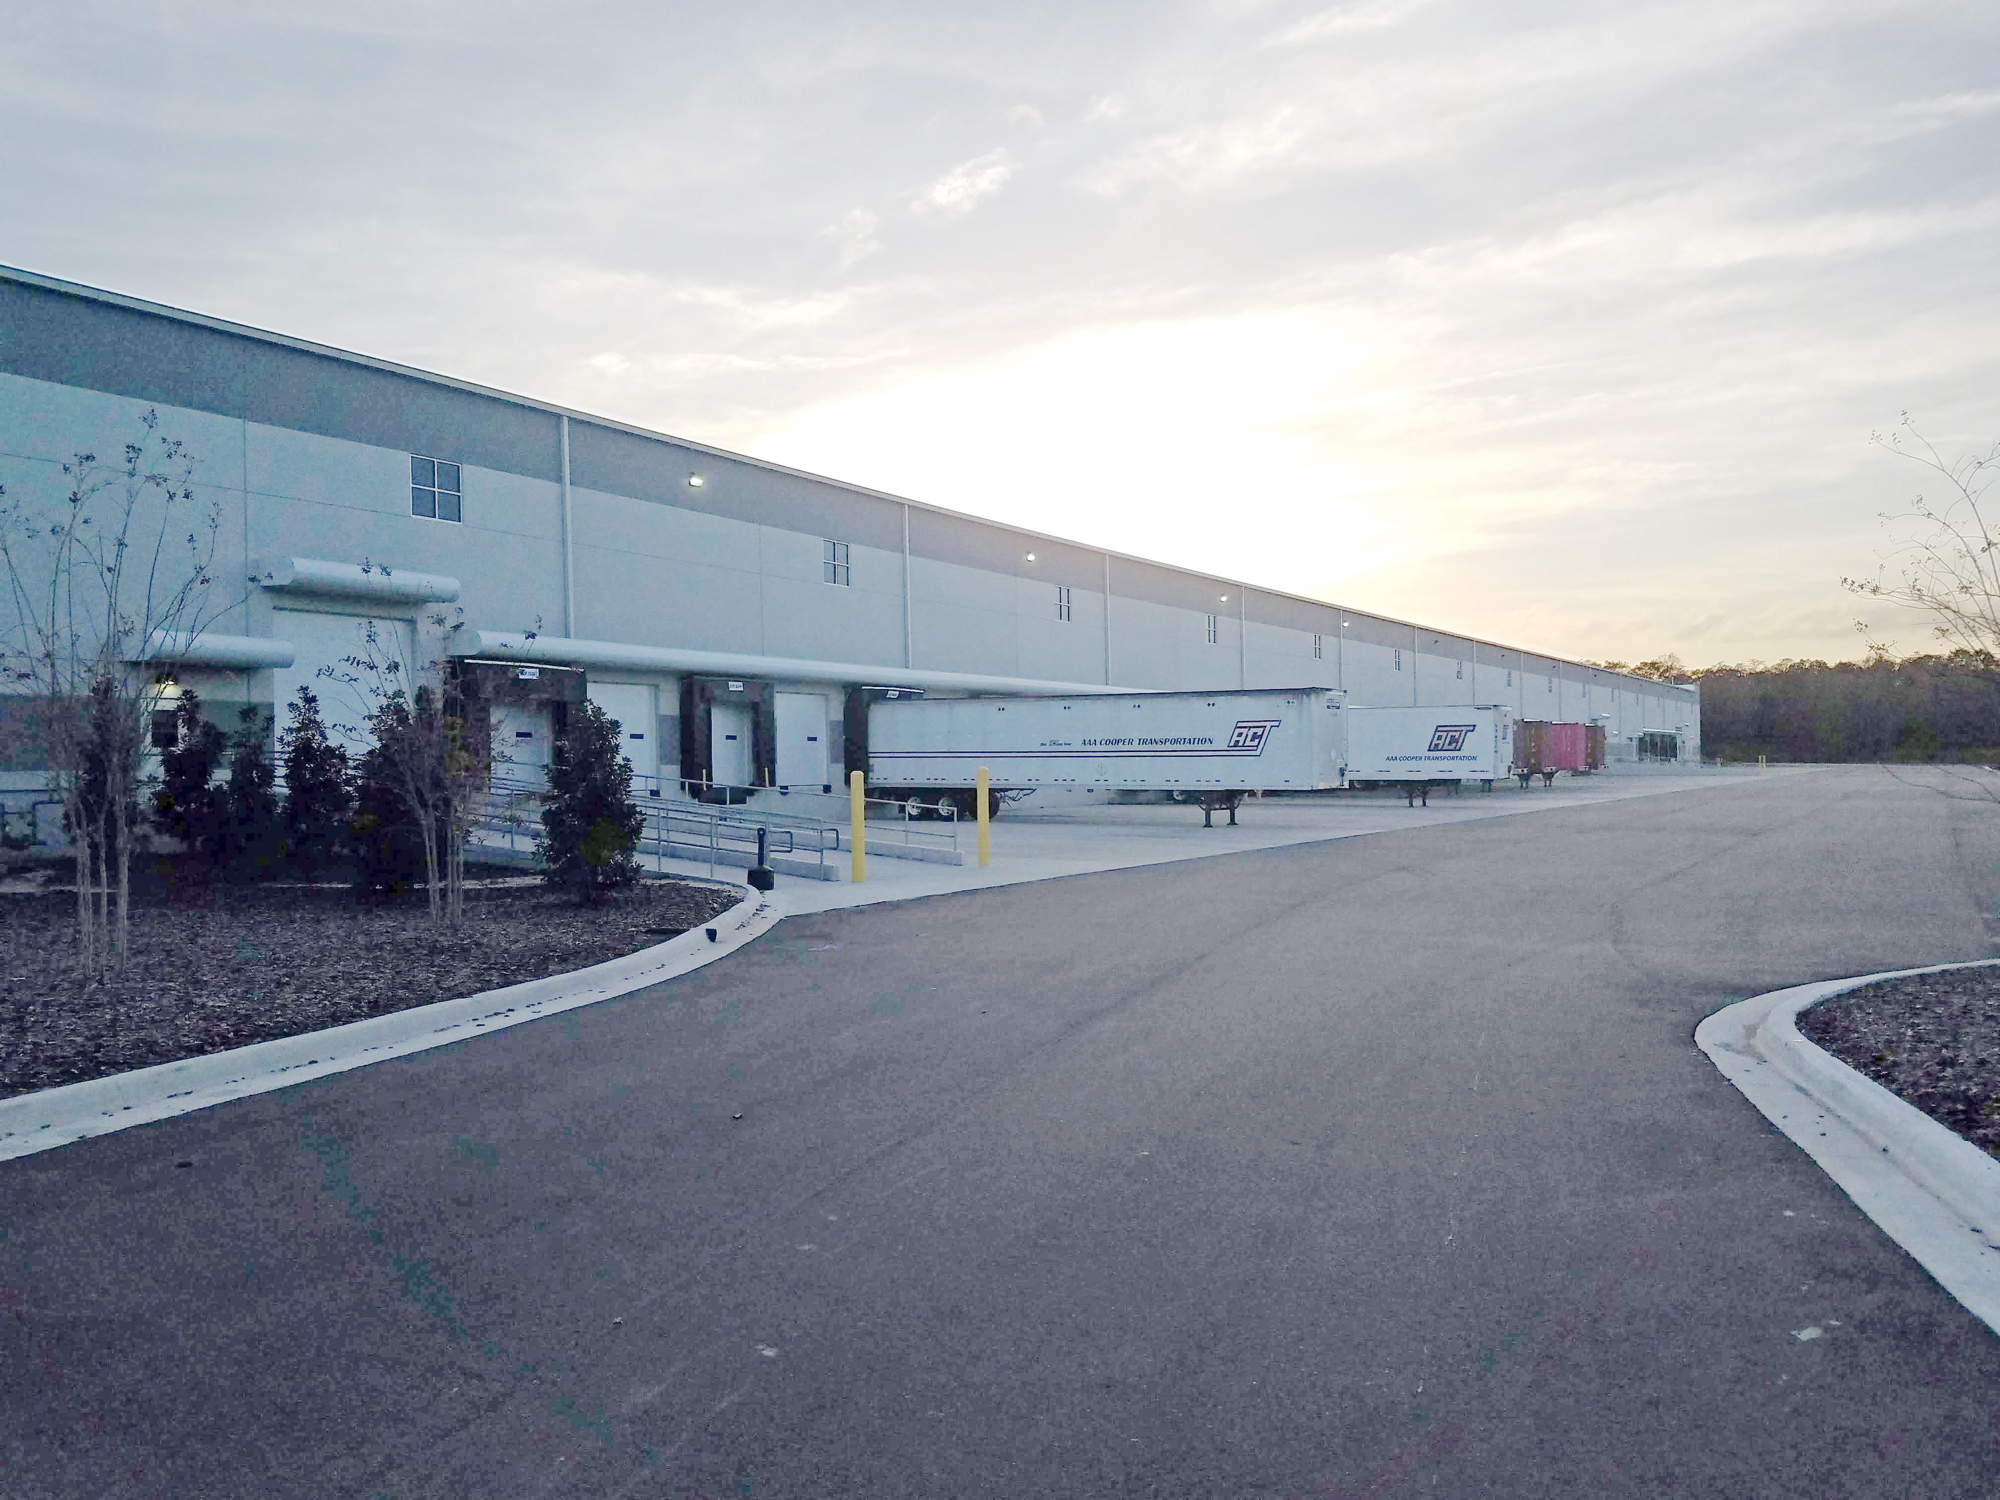 Pattillo started construction in 2018 on the 163,615-square-foot NorthPoint Building 12A in NorthPoint Industrial Park for TRUaire to lease.